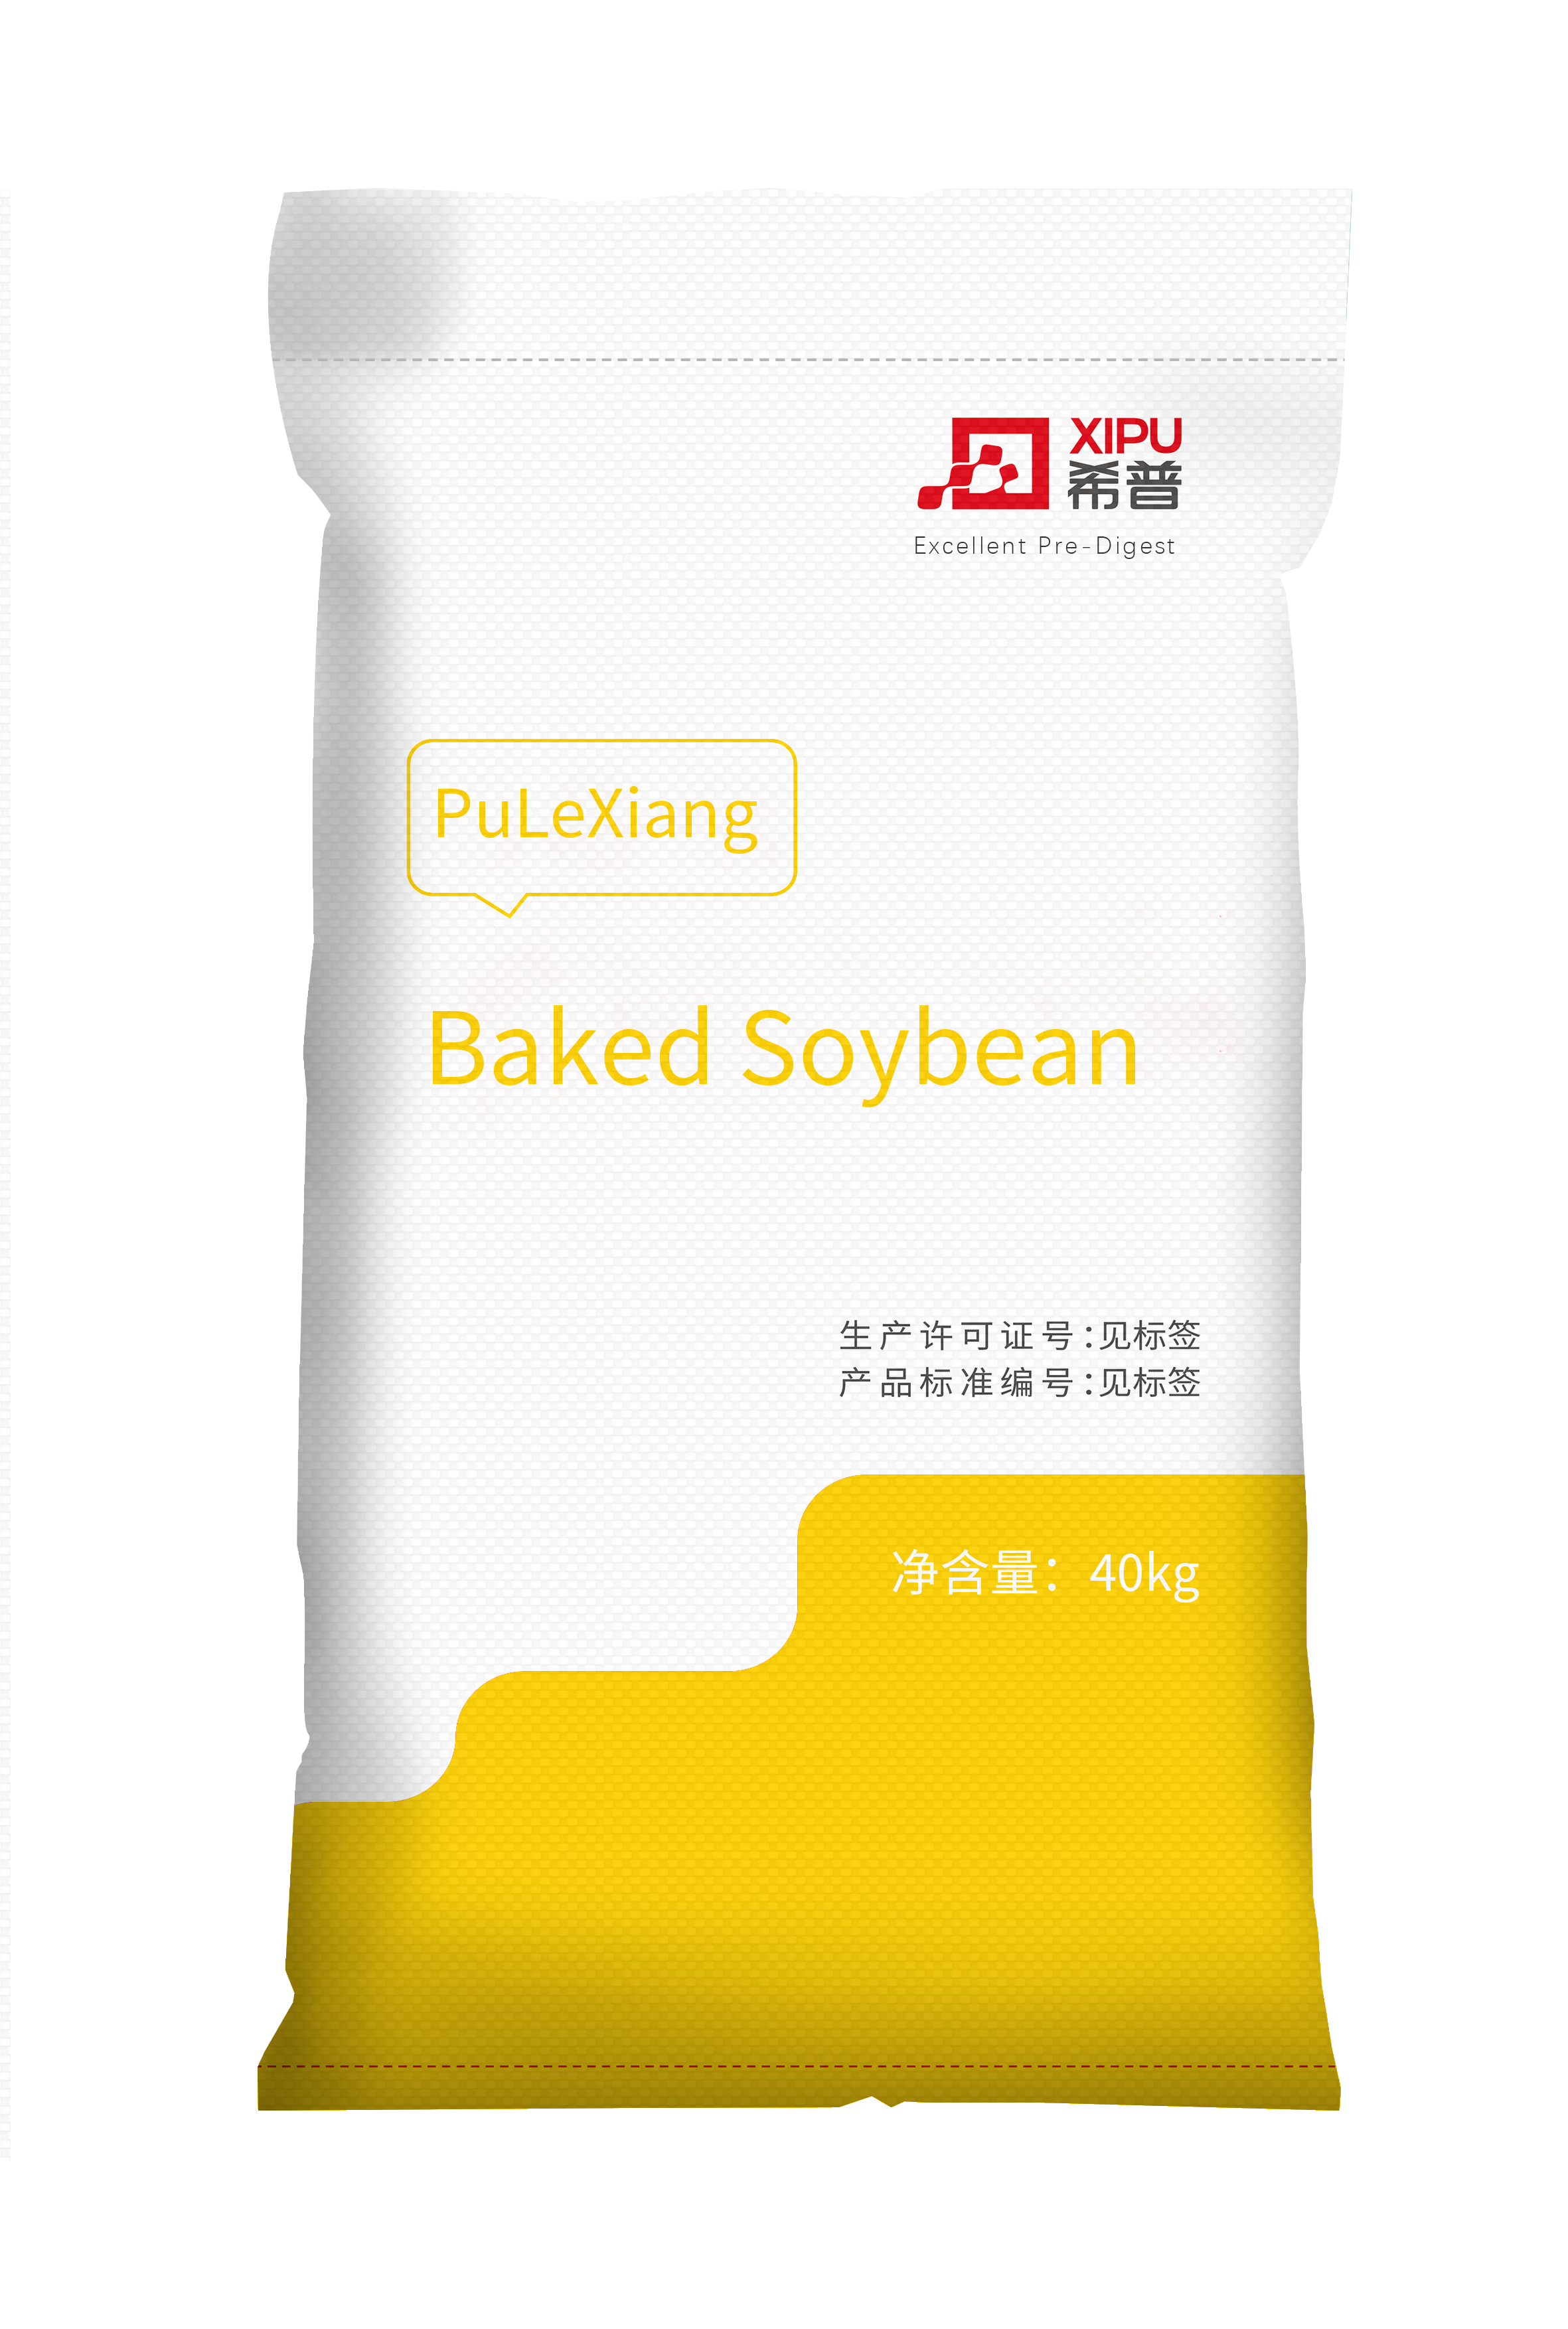 Pulexiang Baked Soybean